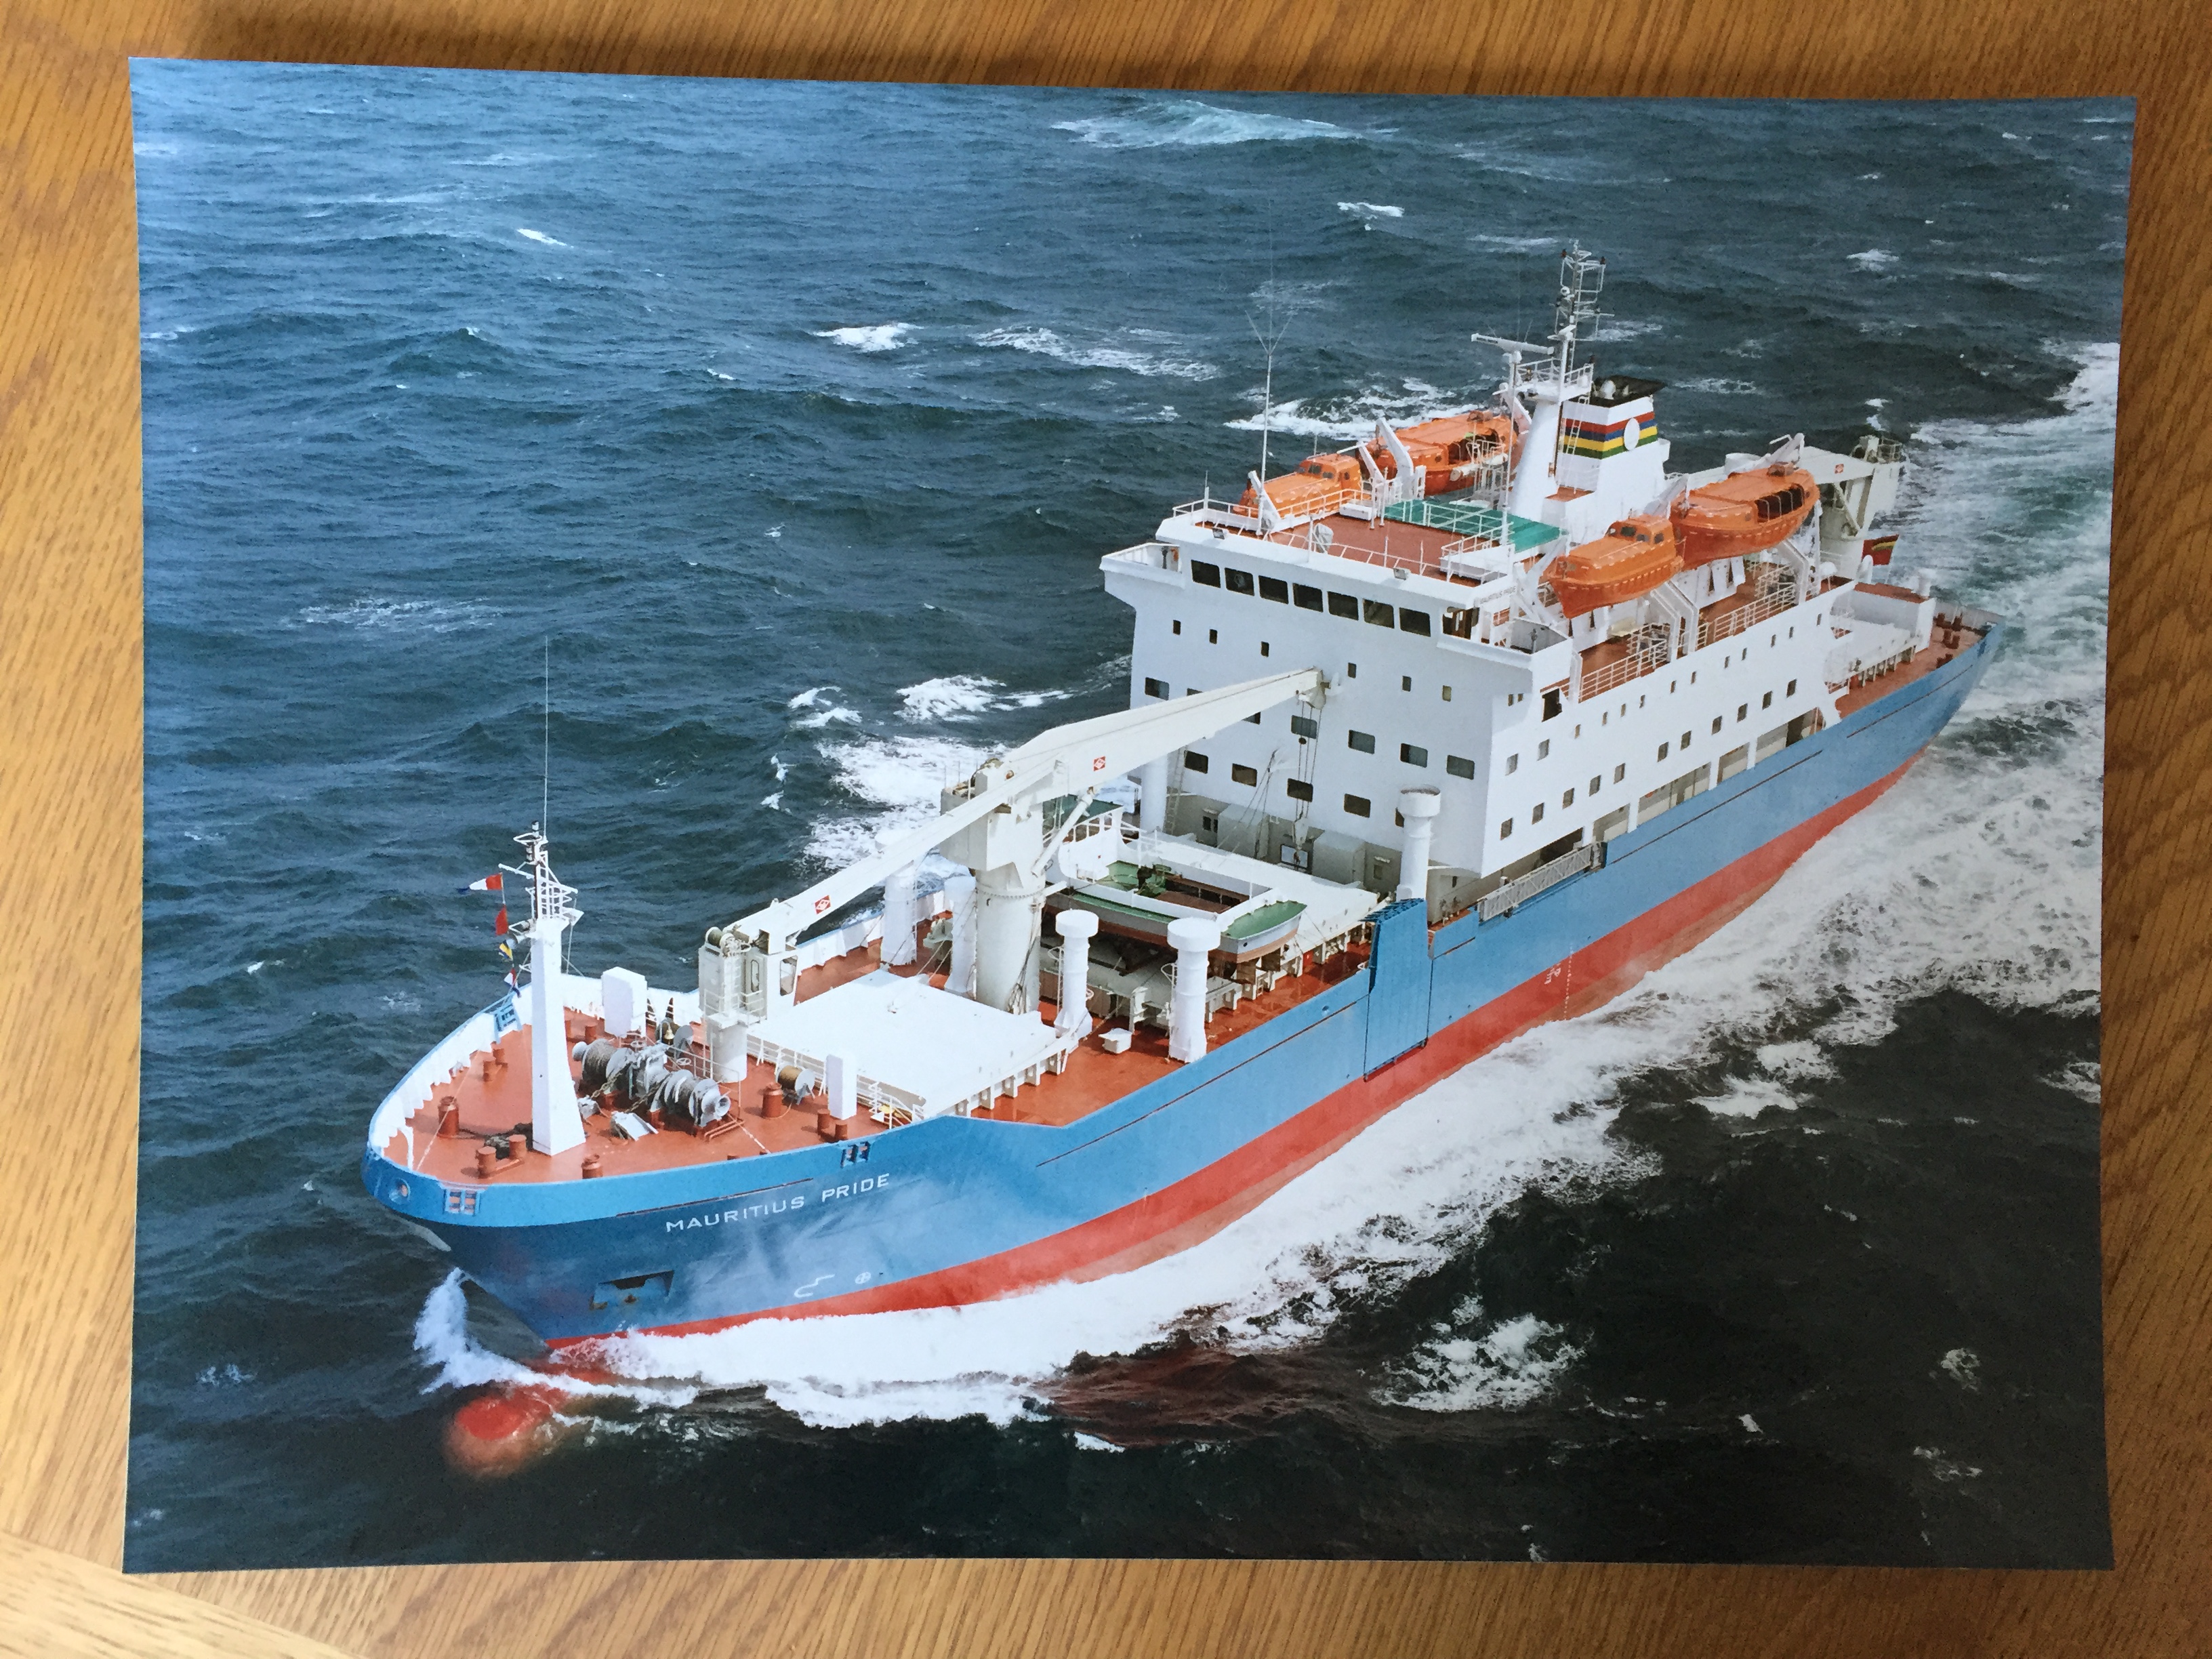 LARGE SIZE COLOUR PHOTOGRAPH OF THE CONTAINER VESSEL MAURITIUS PRIDE